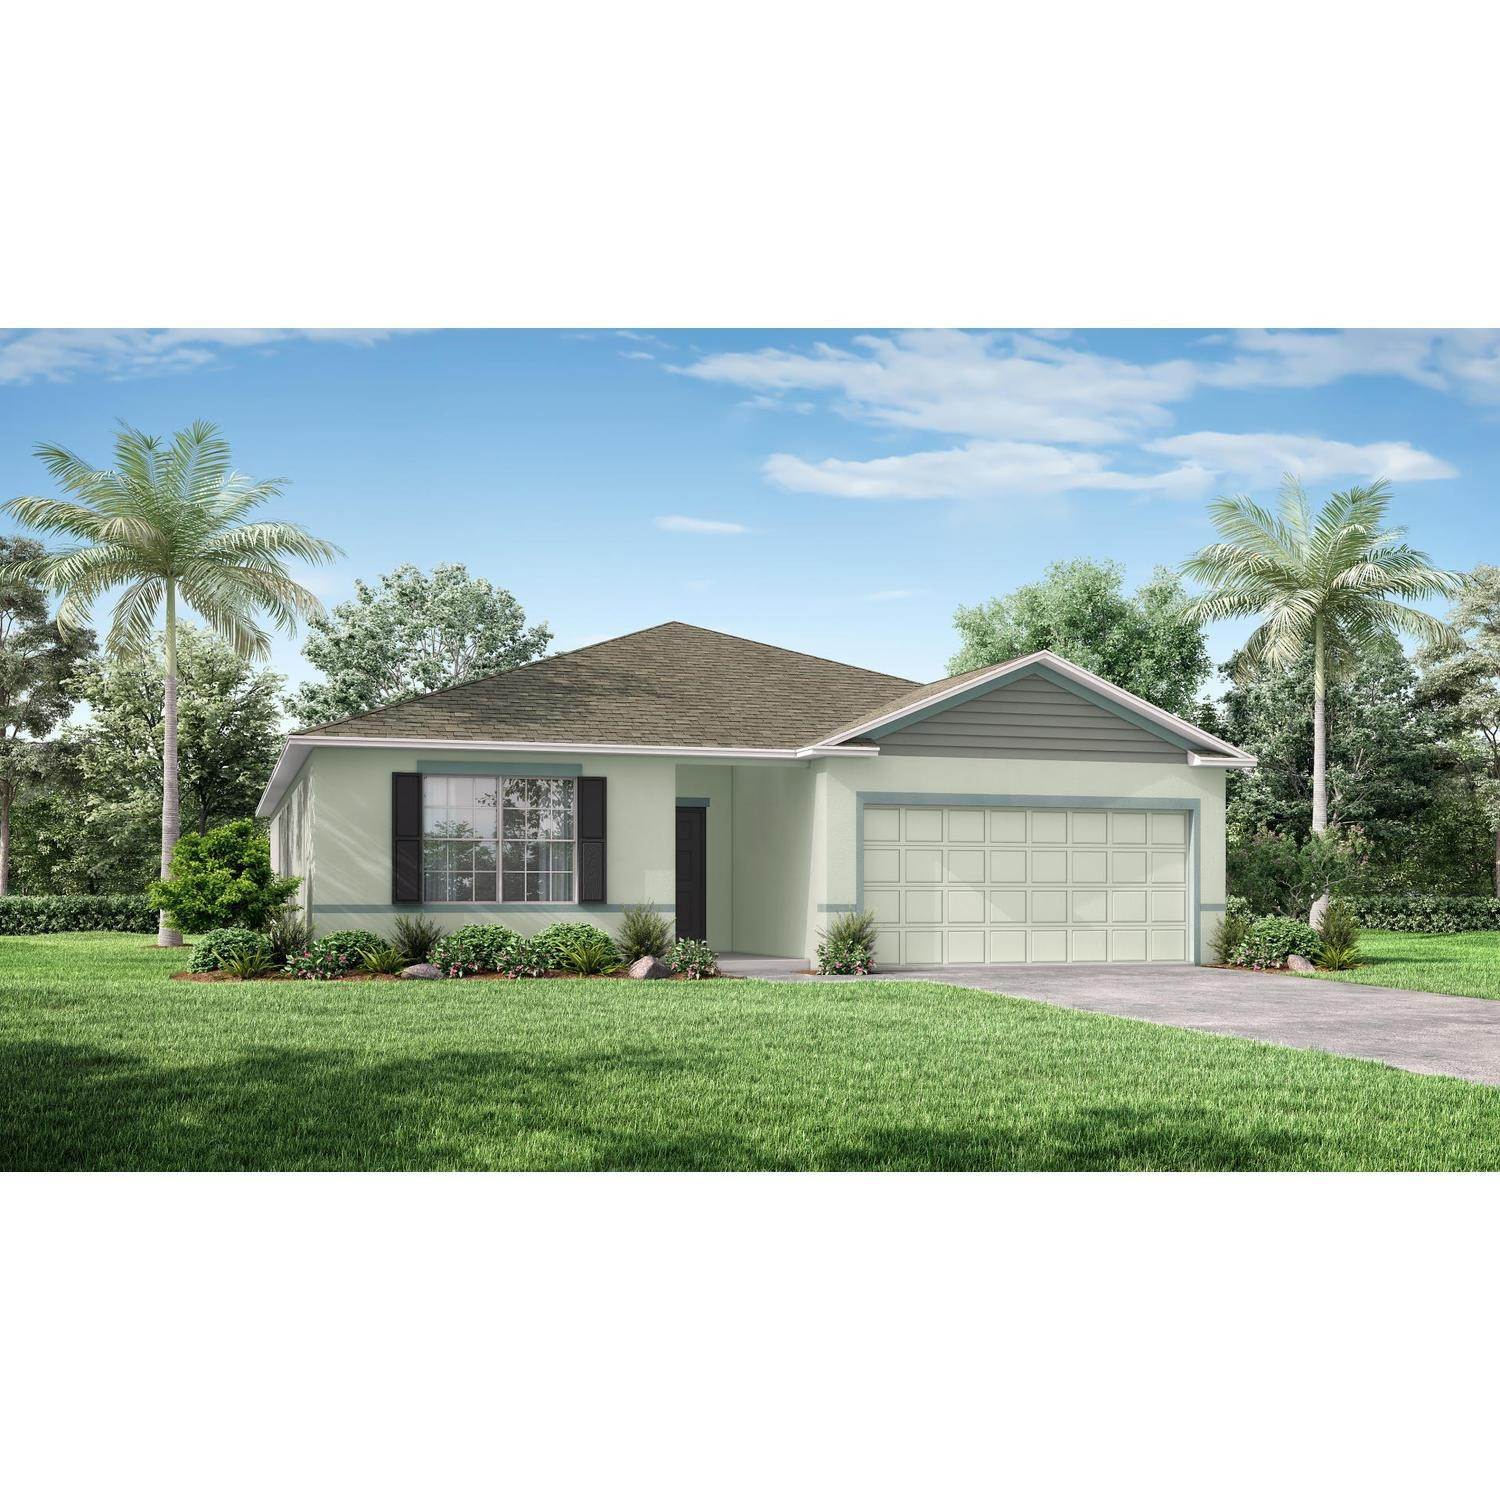 Single Family for Sale at Brooksville, FL 34613